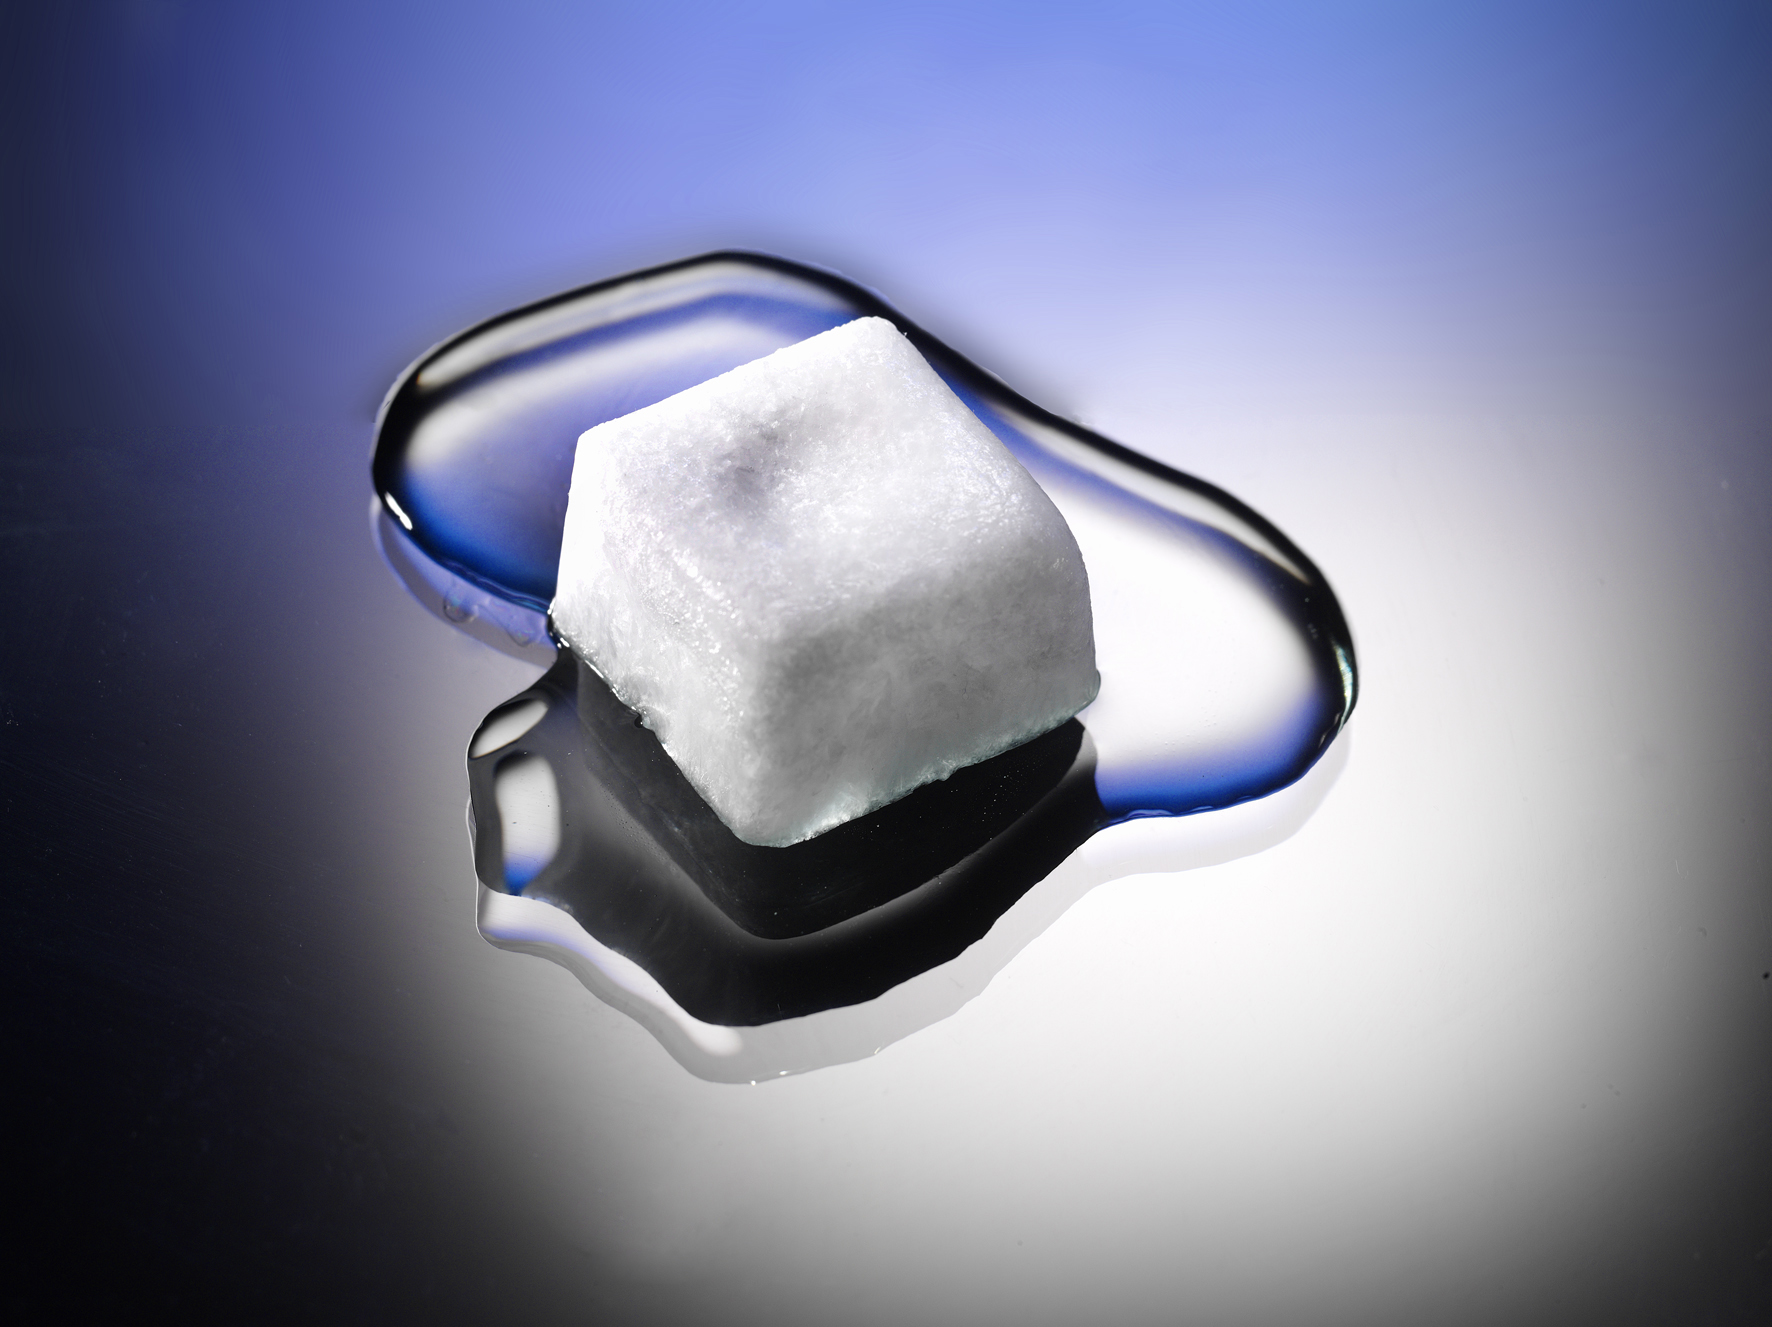 The PCM cube maintains a temperature of 21 degrees Celsius until it is completley melted.